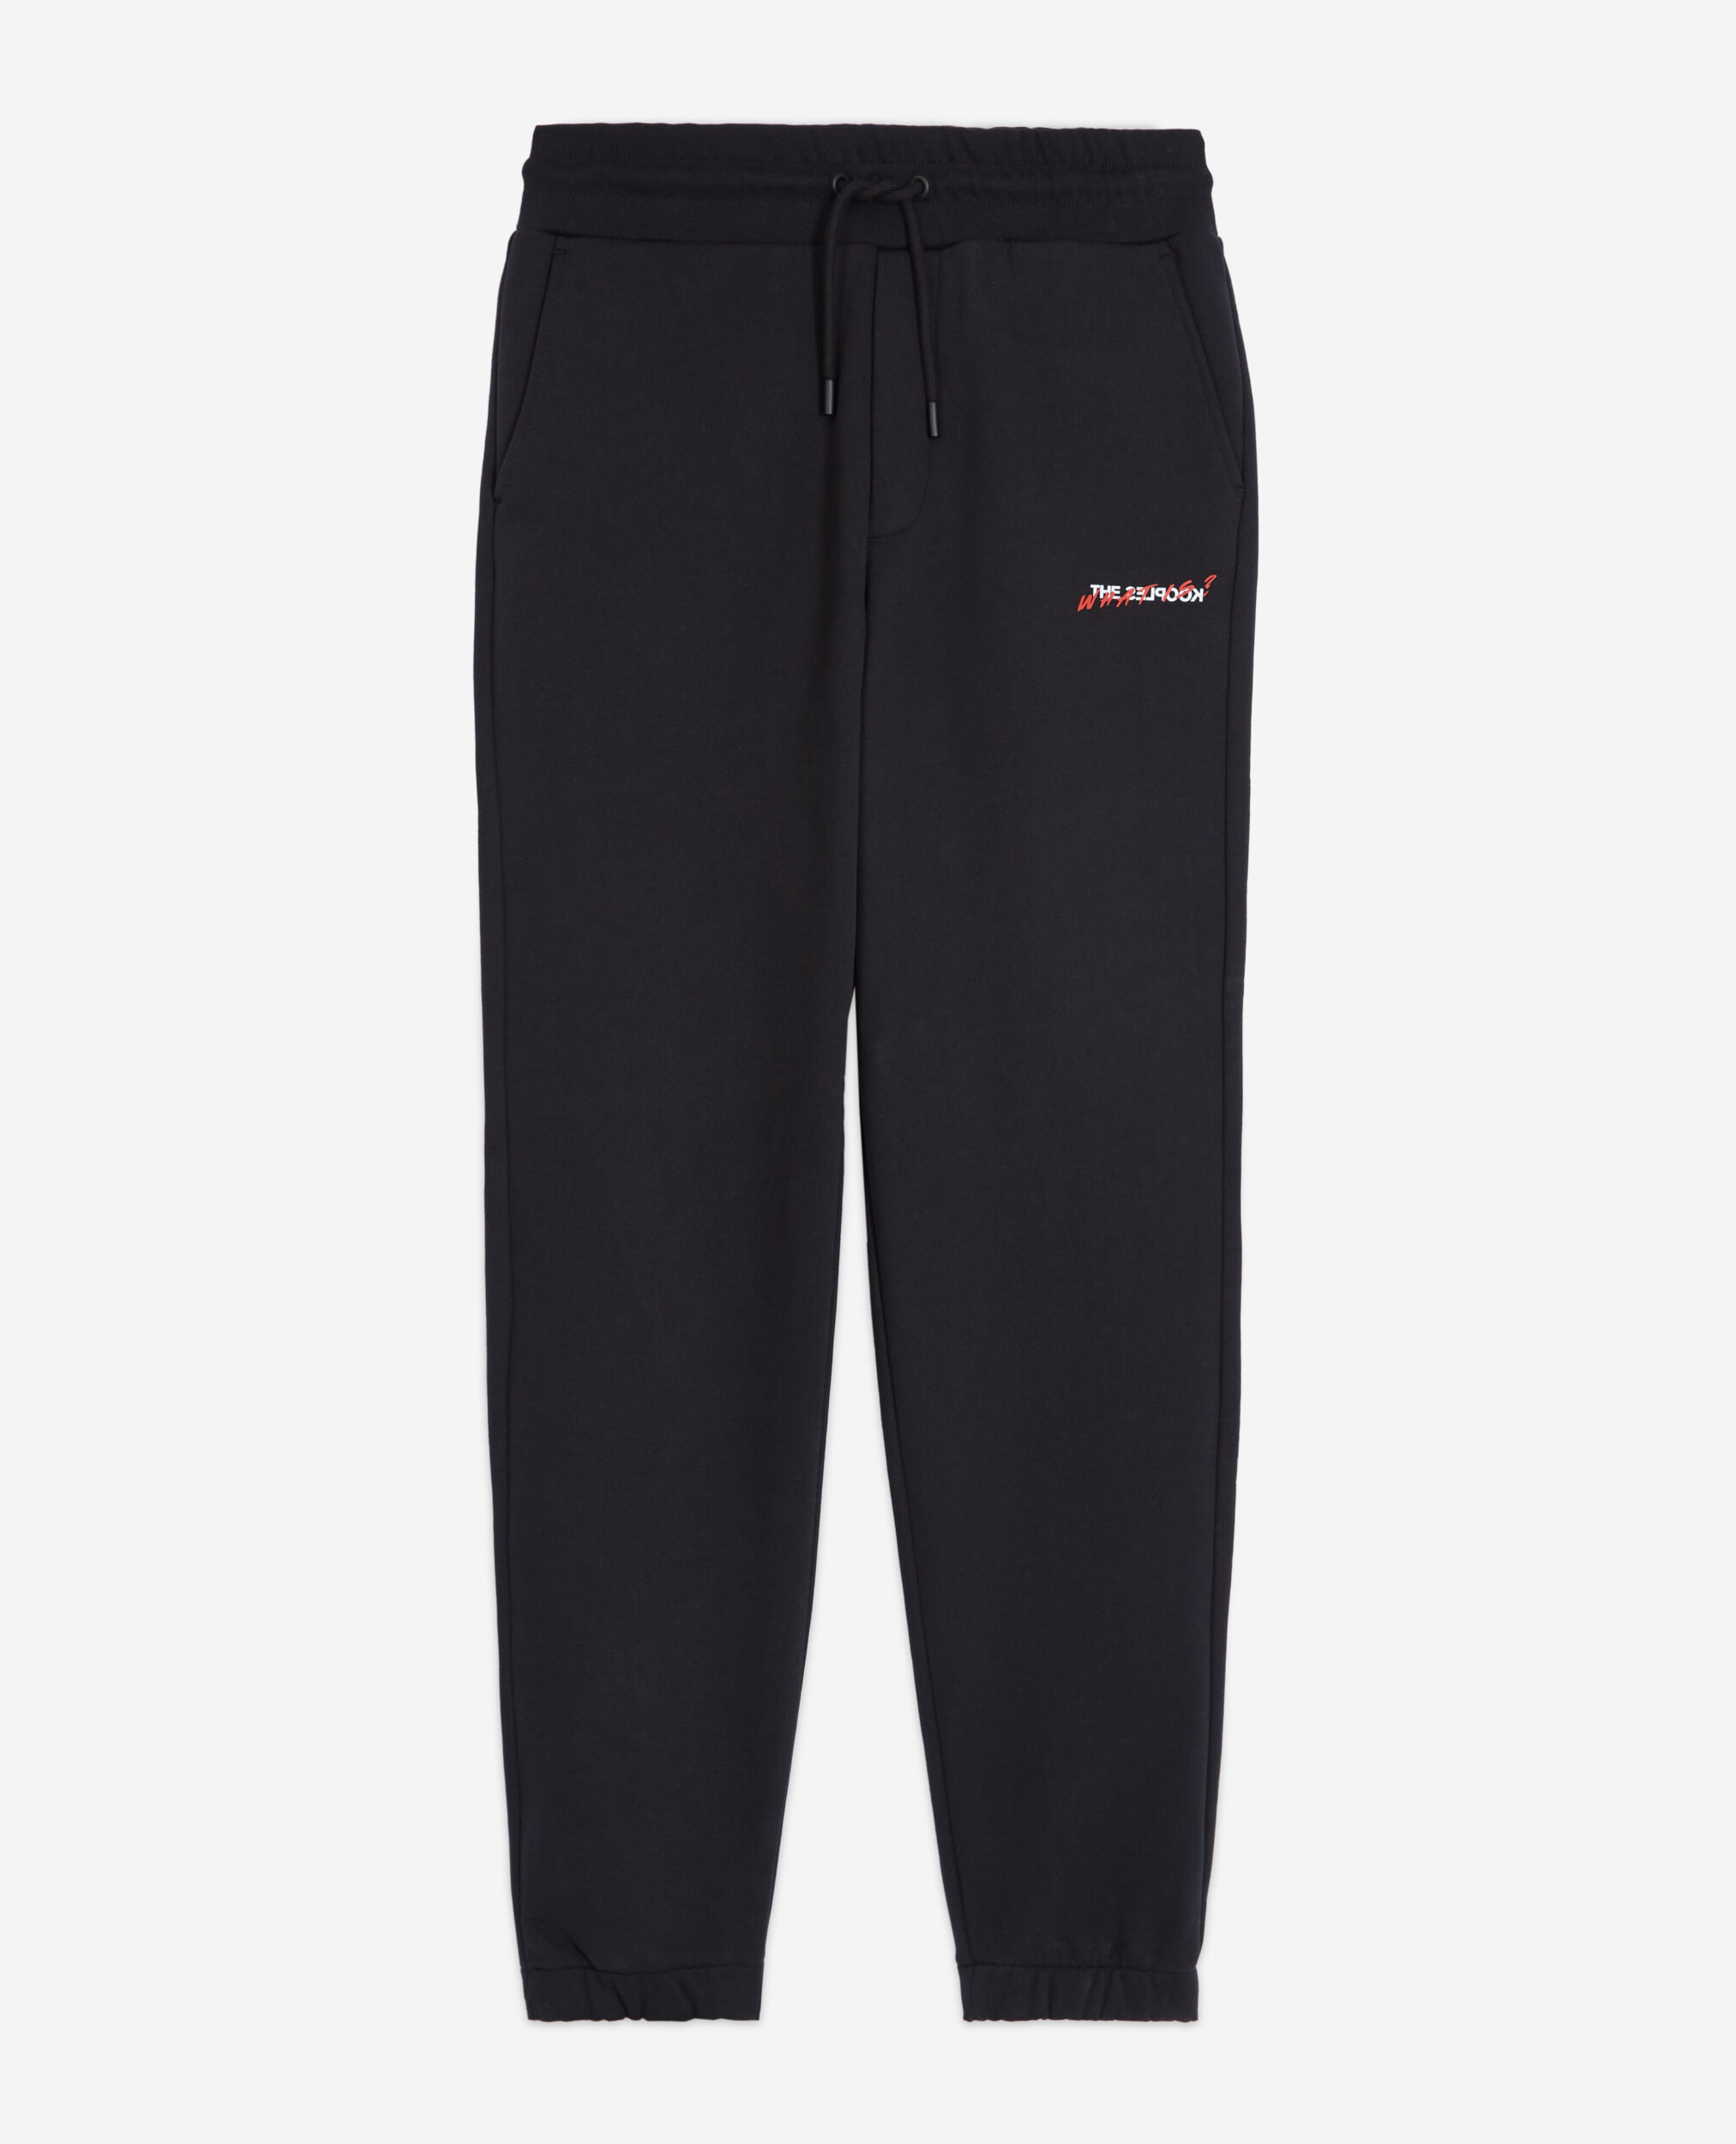 Black joggers with What is print, BLACK, hi-res image number null